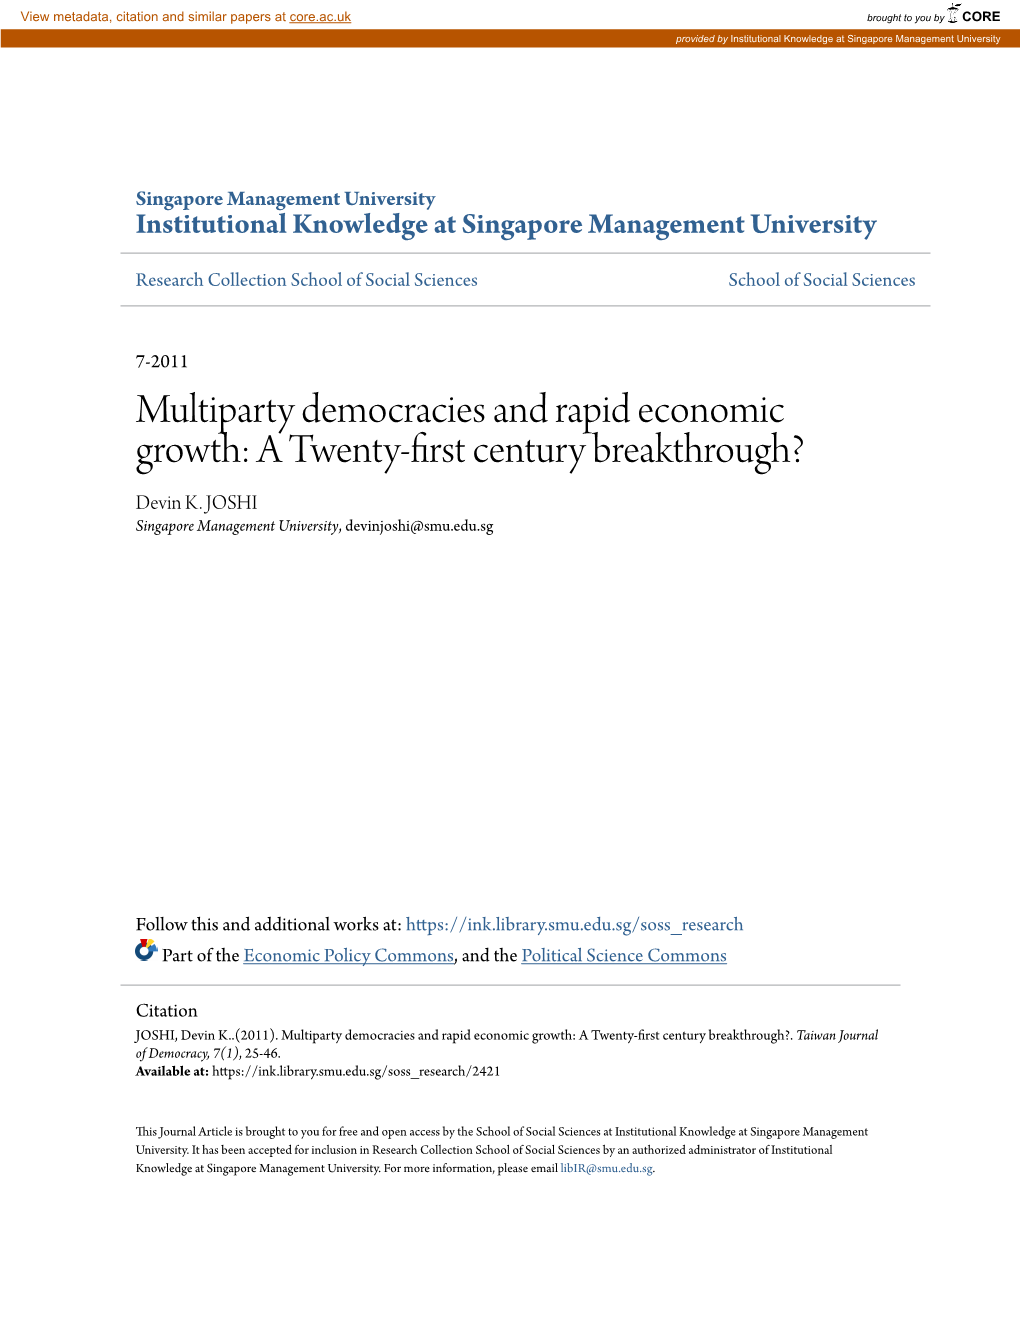 Multiparty Democracies and Rapid Economic Growth: a Twenty-First Century Breakthrough? Devin K